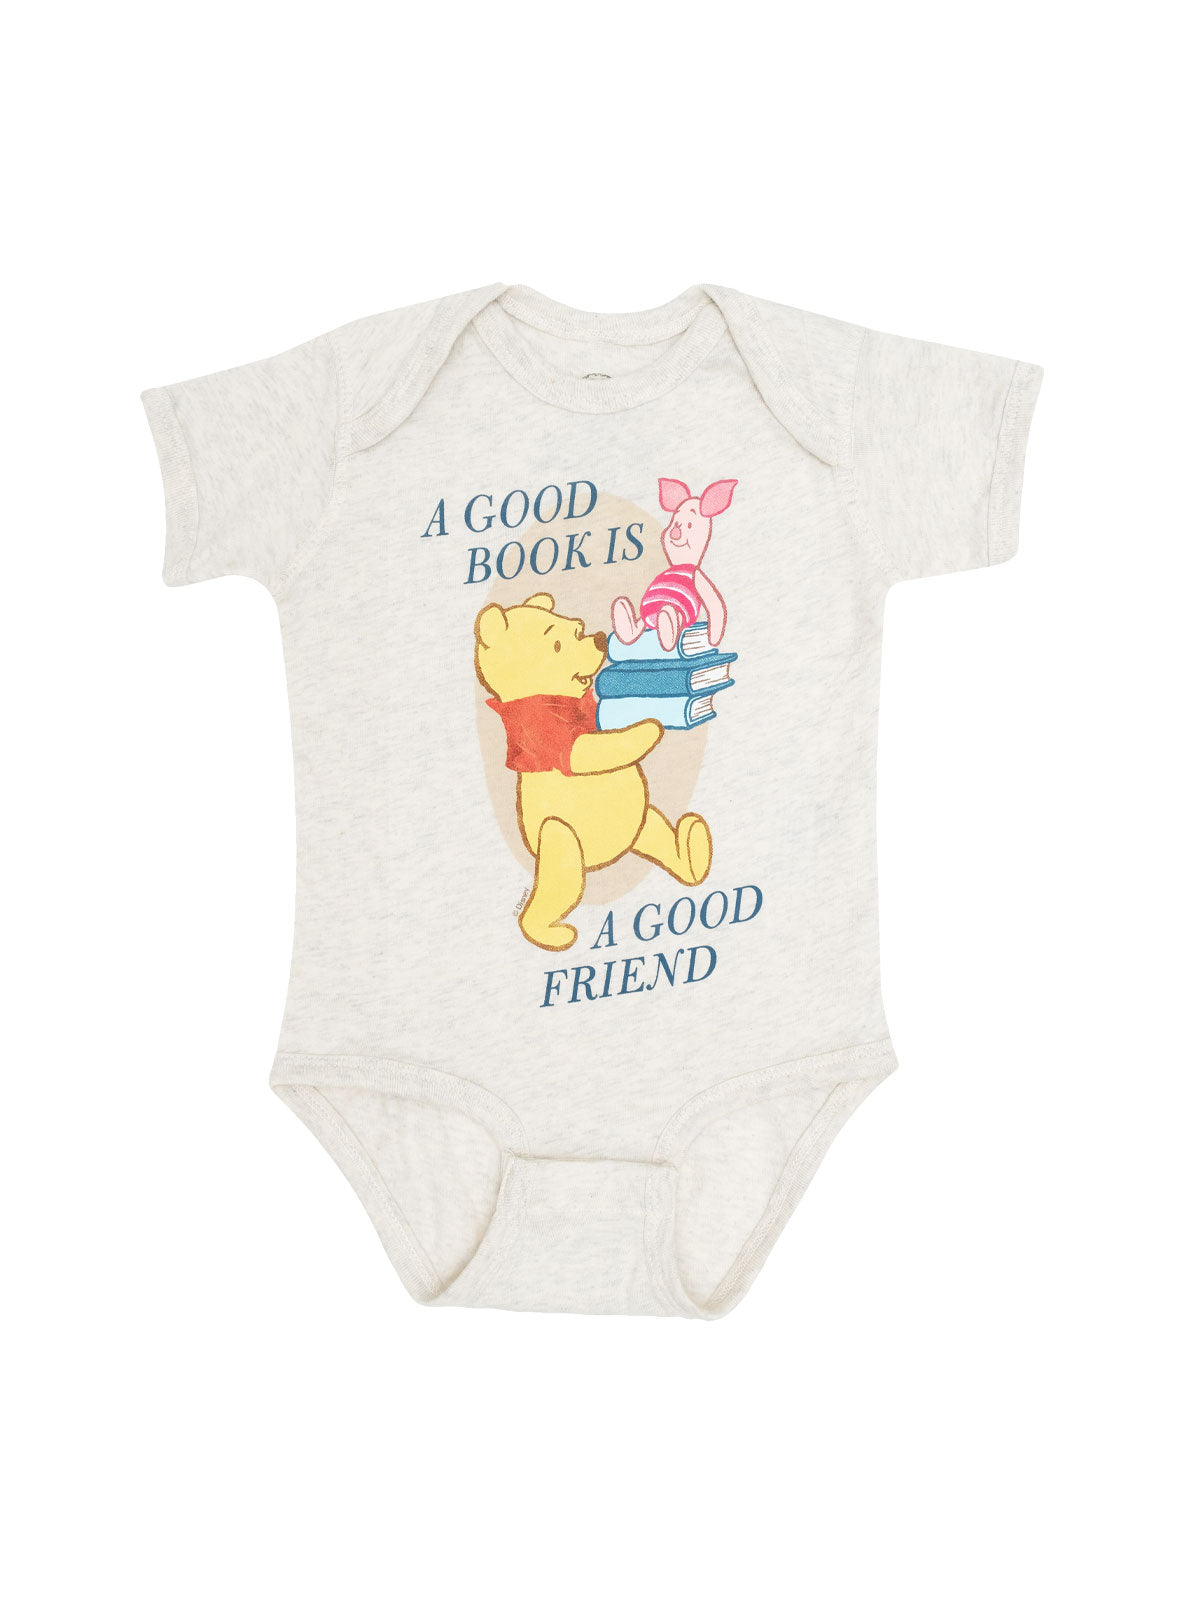 Baby Book Bodysuits For The Smallest Readers | Out of Print